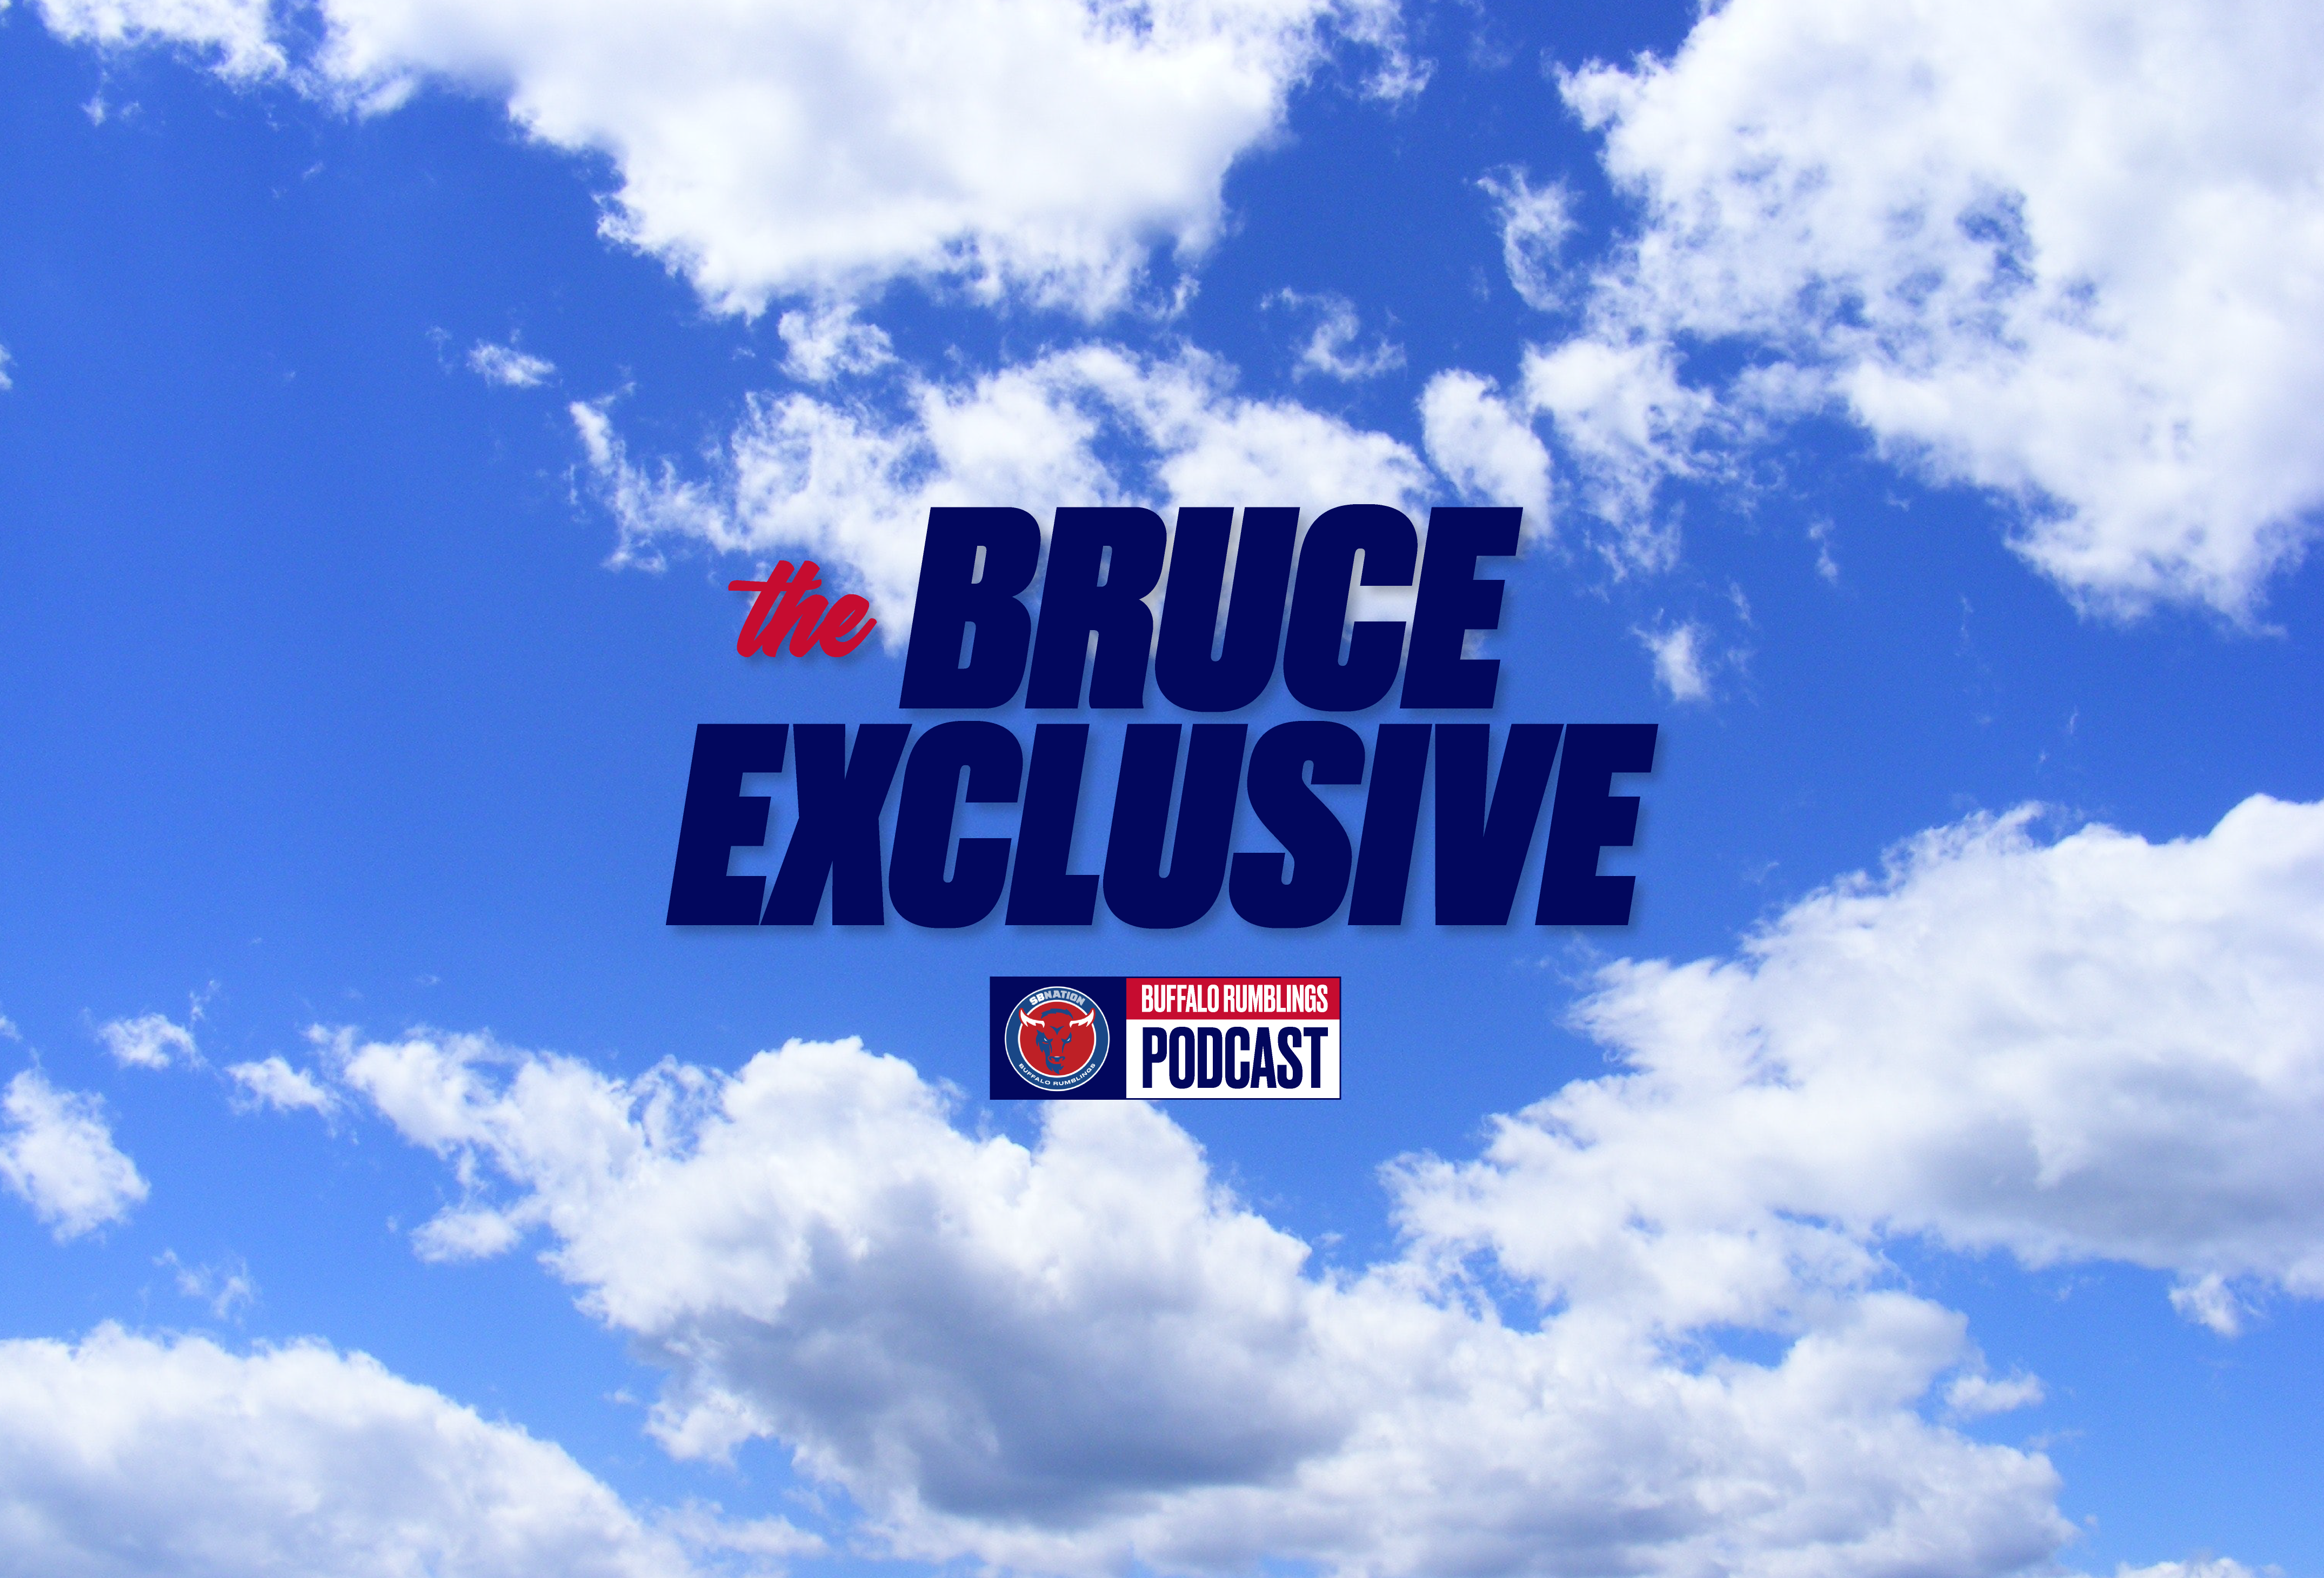 The Bruce Exclusive podcast Cover Art